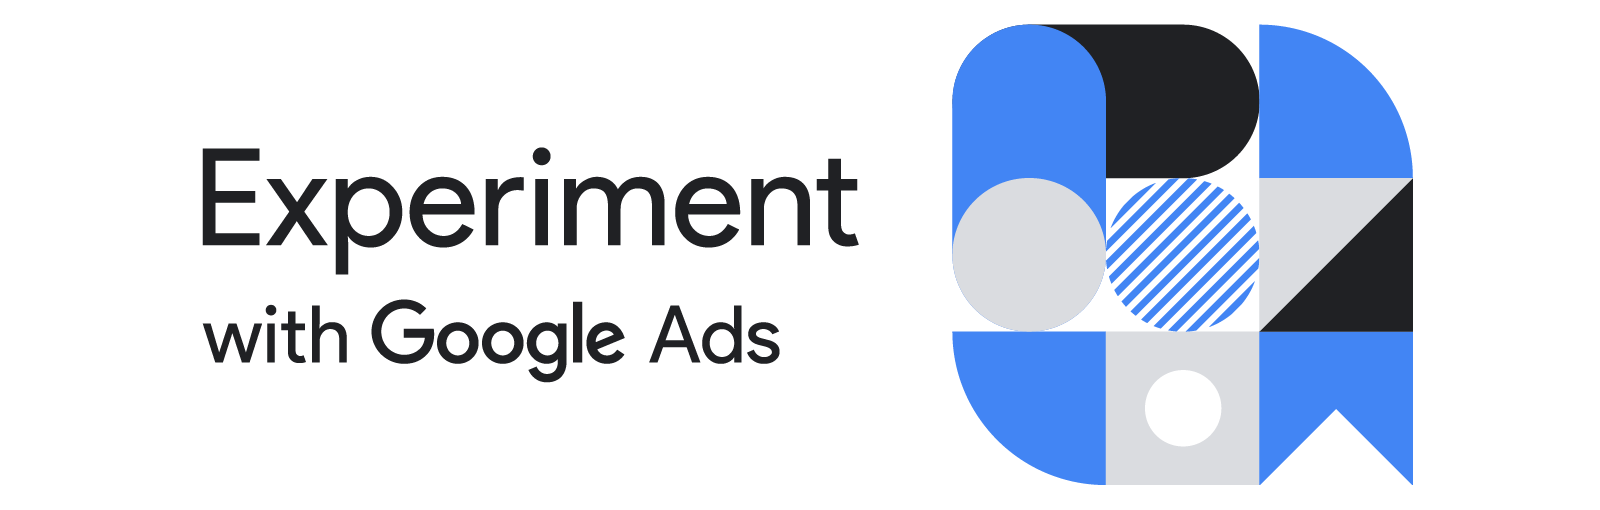 Experiment with Google Ads. Geometric shapes in various colors and patterns, demonstrating the dynamic nature of Google Ads experiments.